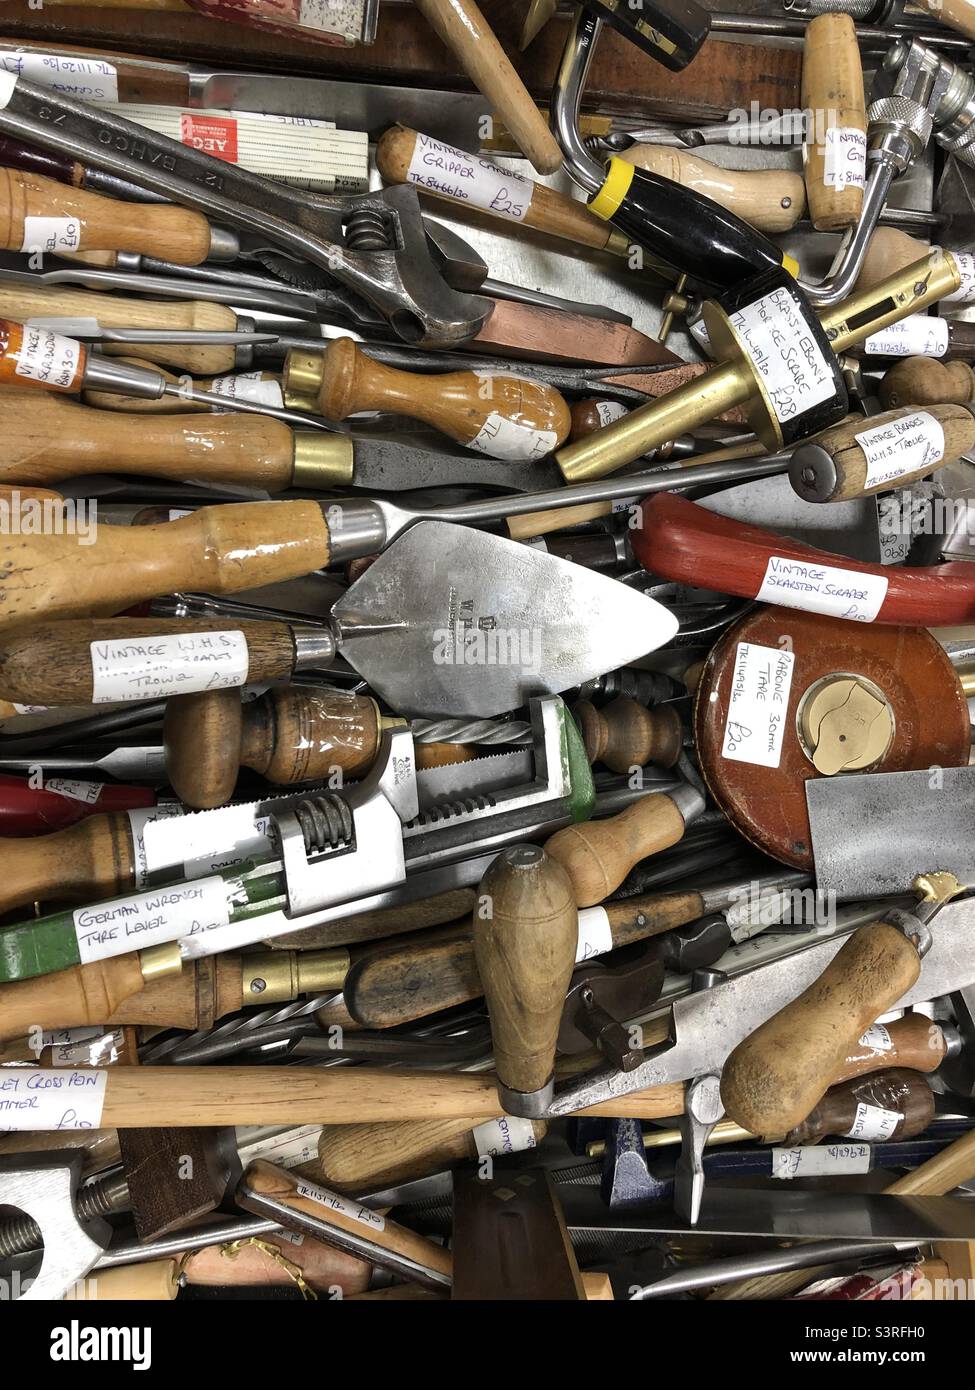 Old collection of hand tools Stock Photo